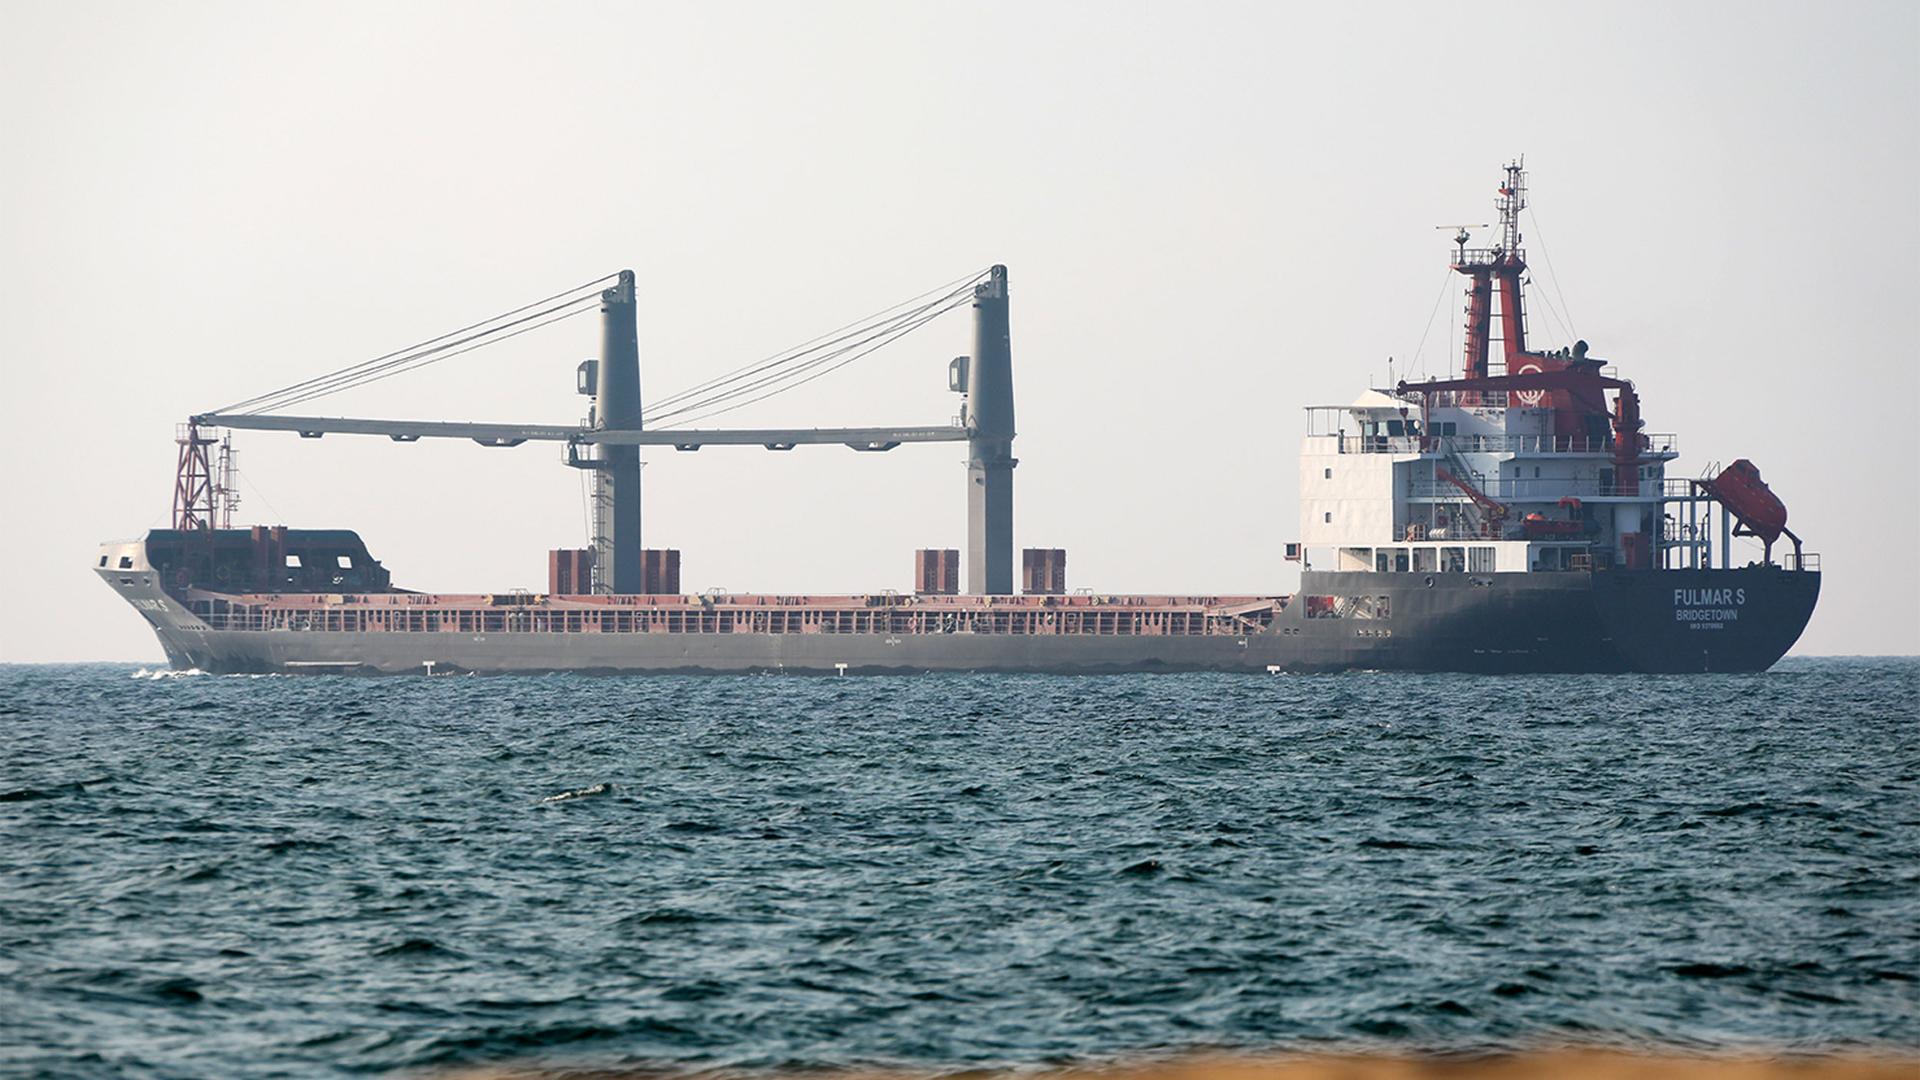 The Fulmar S vessel carrier with 12,000 tons of corn makes its way from the port in Odesa, Ukraine.